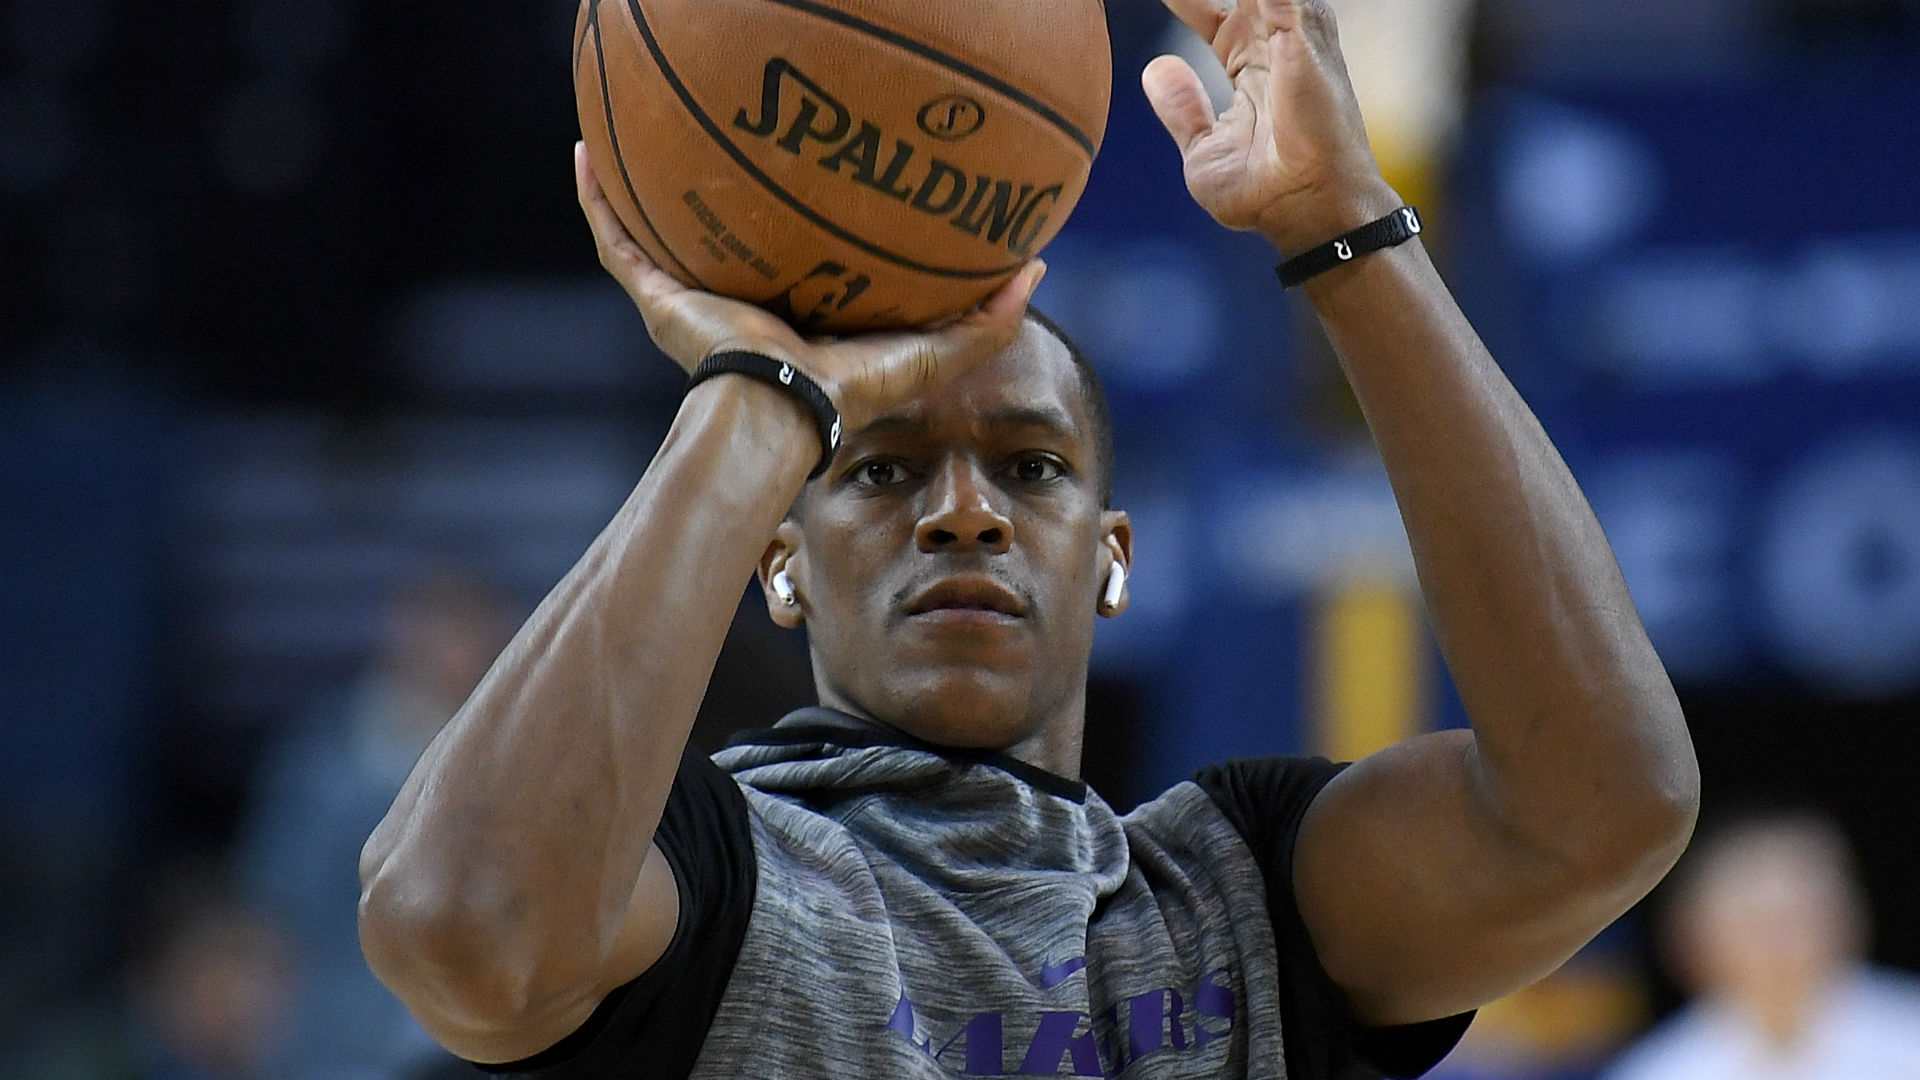 Report: Los Angeles Lakers guard Rajon Rondo to undergo surgery on his right hand ...1920 x 1080